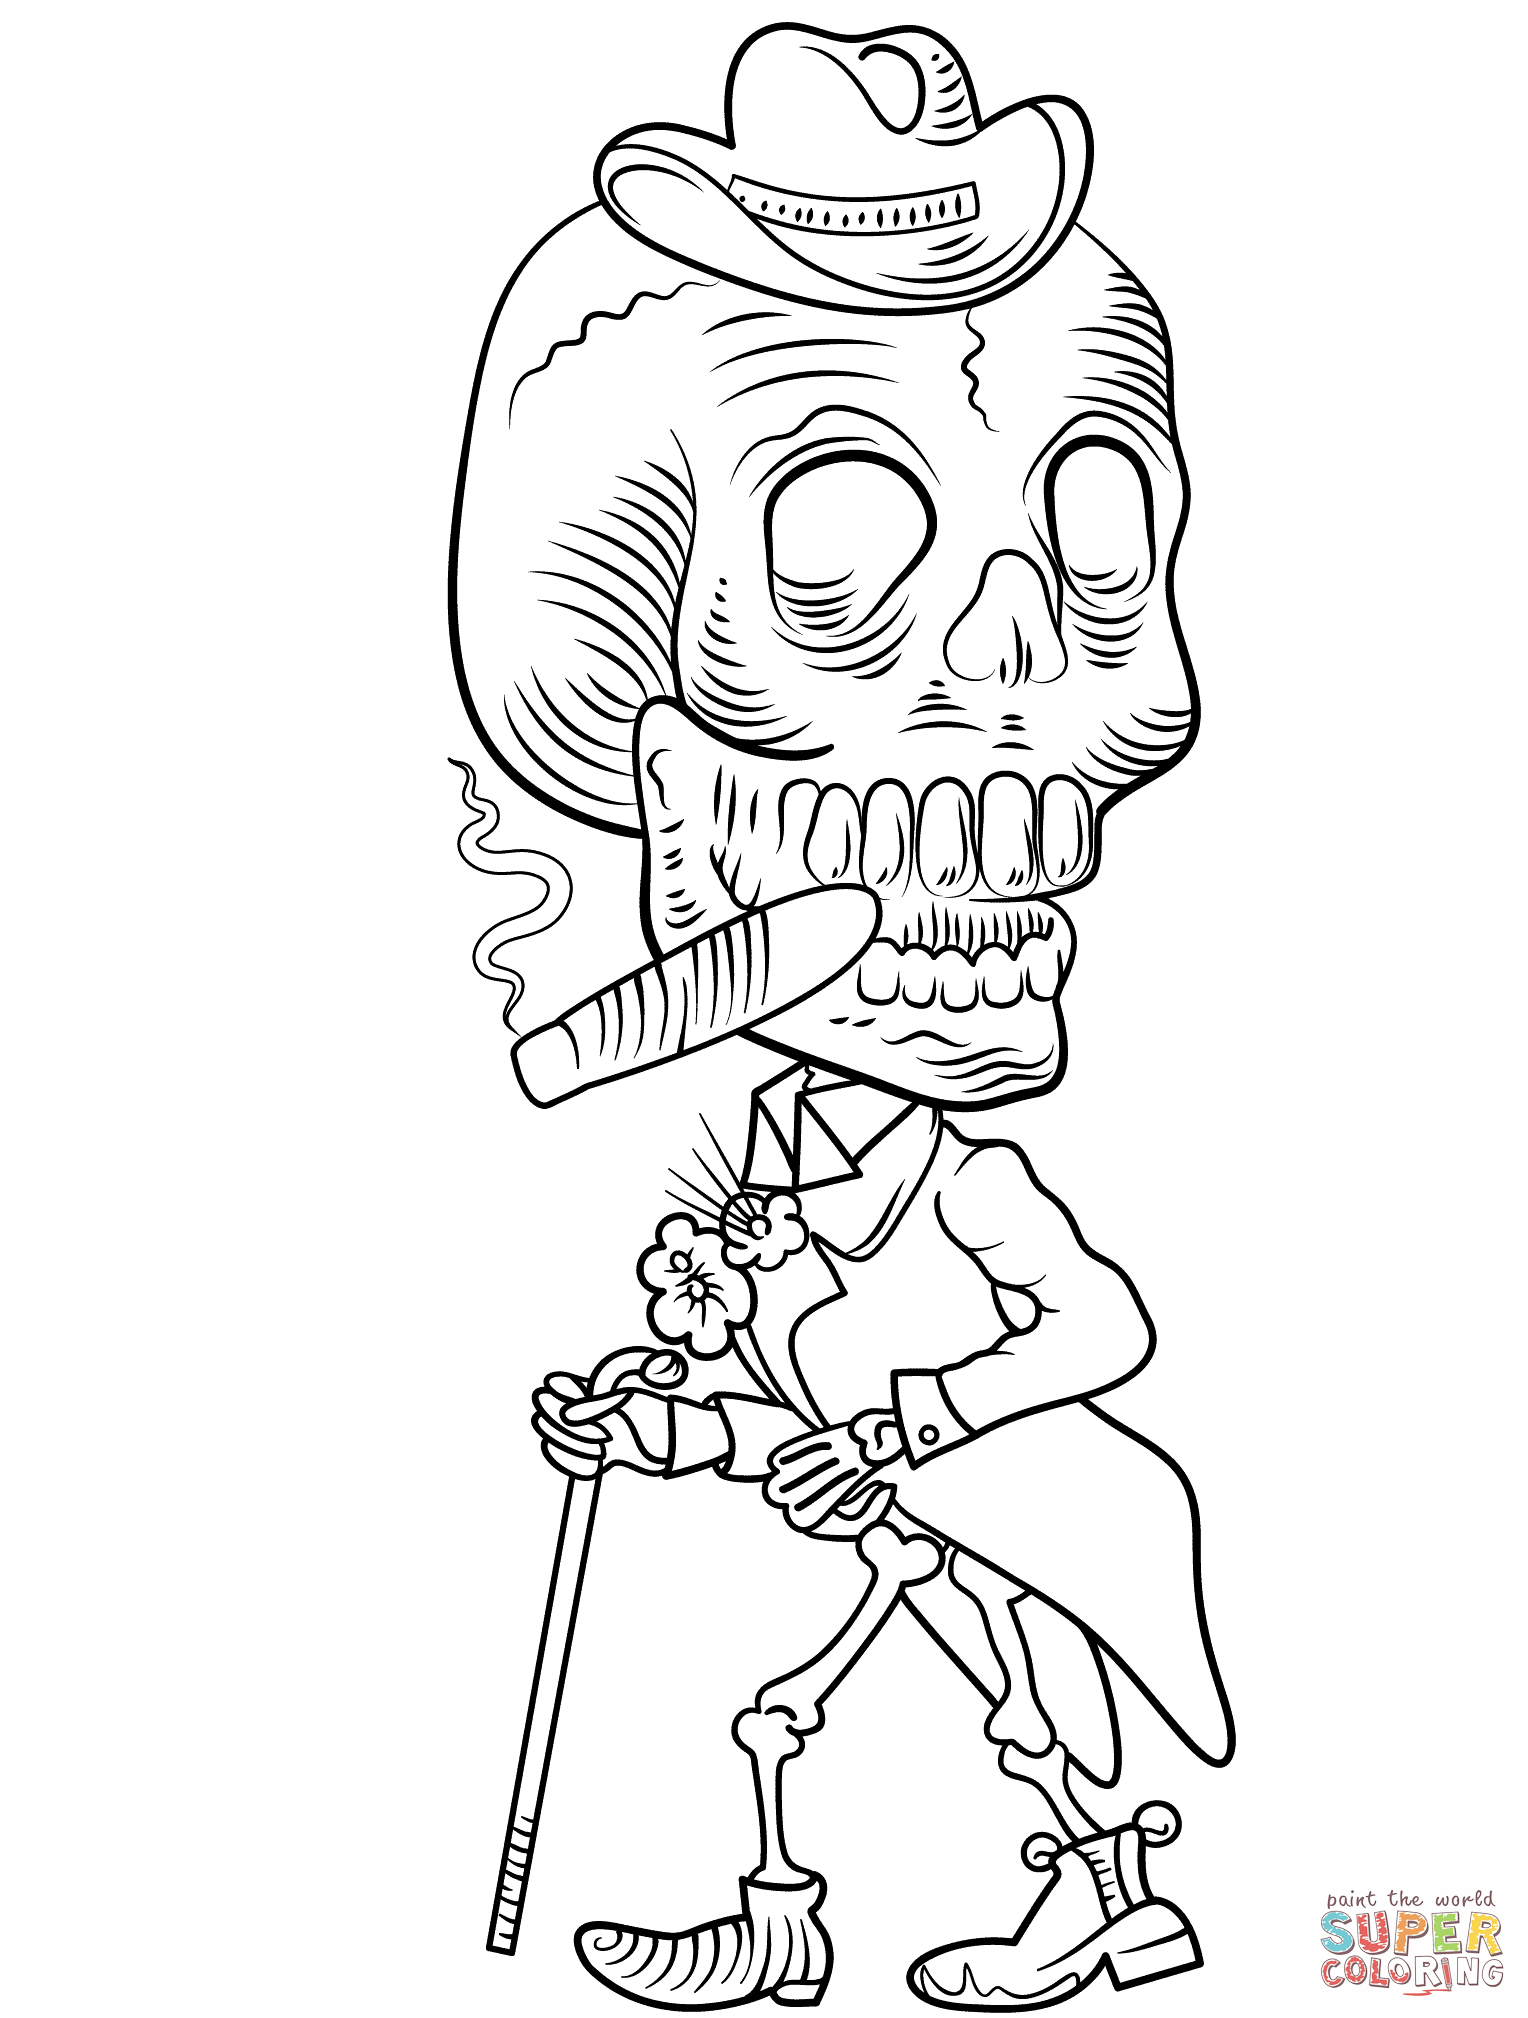 Human Skeleton Coloring Pages Skeleton Coloring Pages Printable Coloring Page For Kids